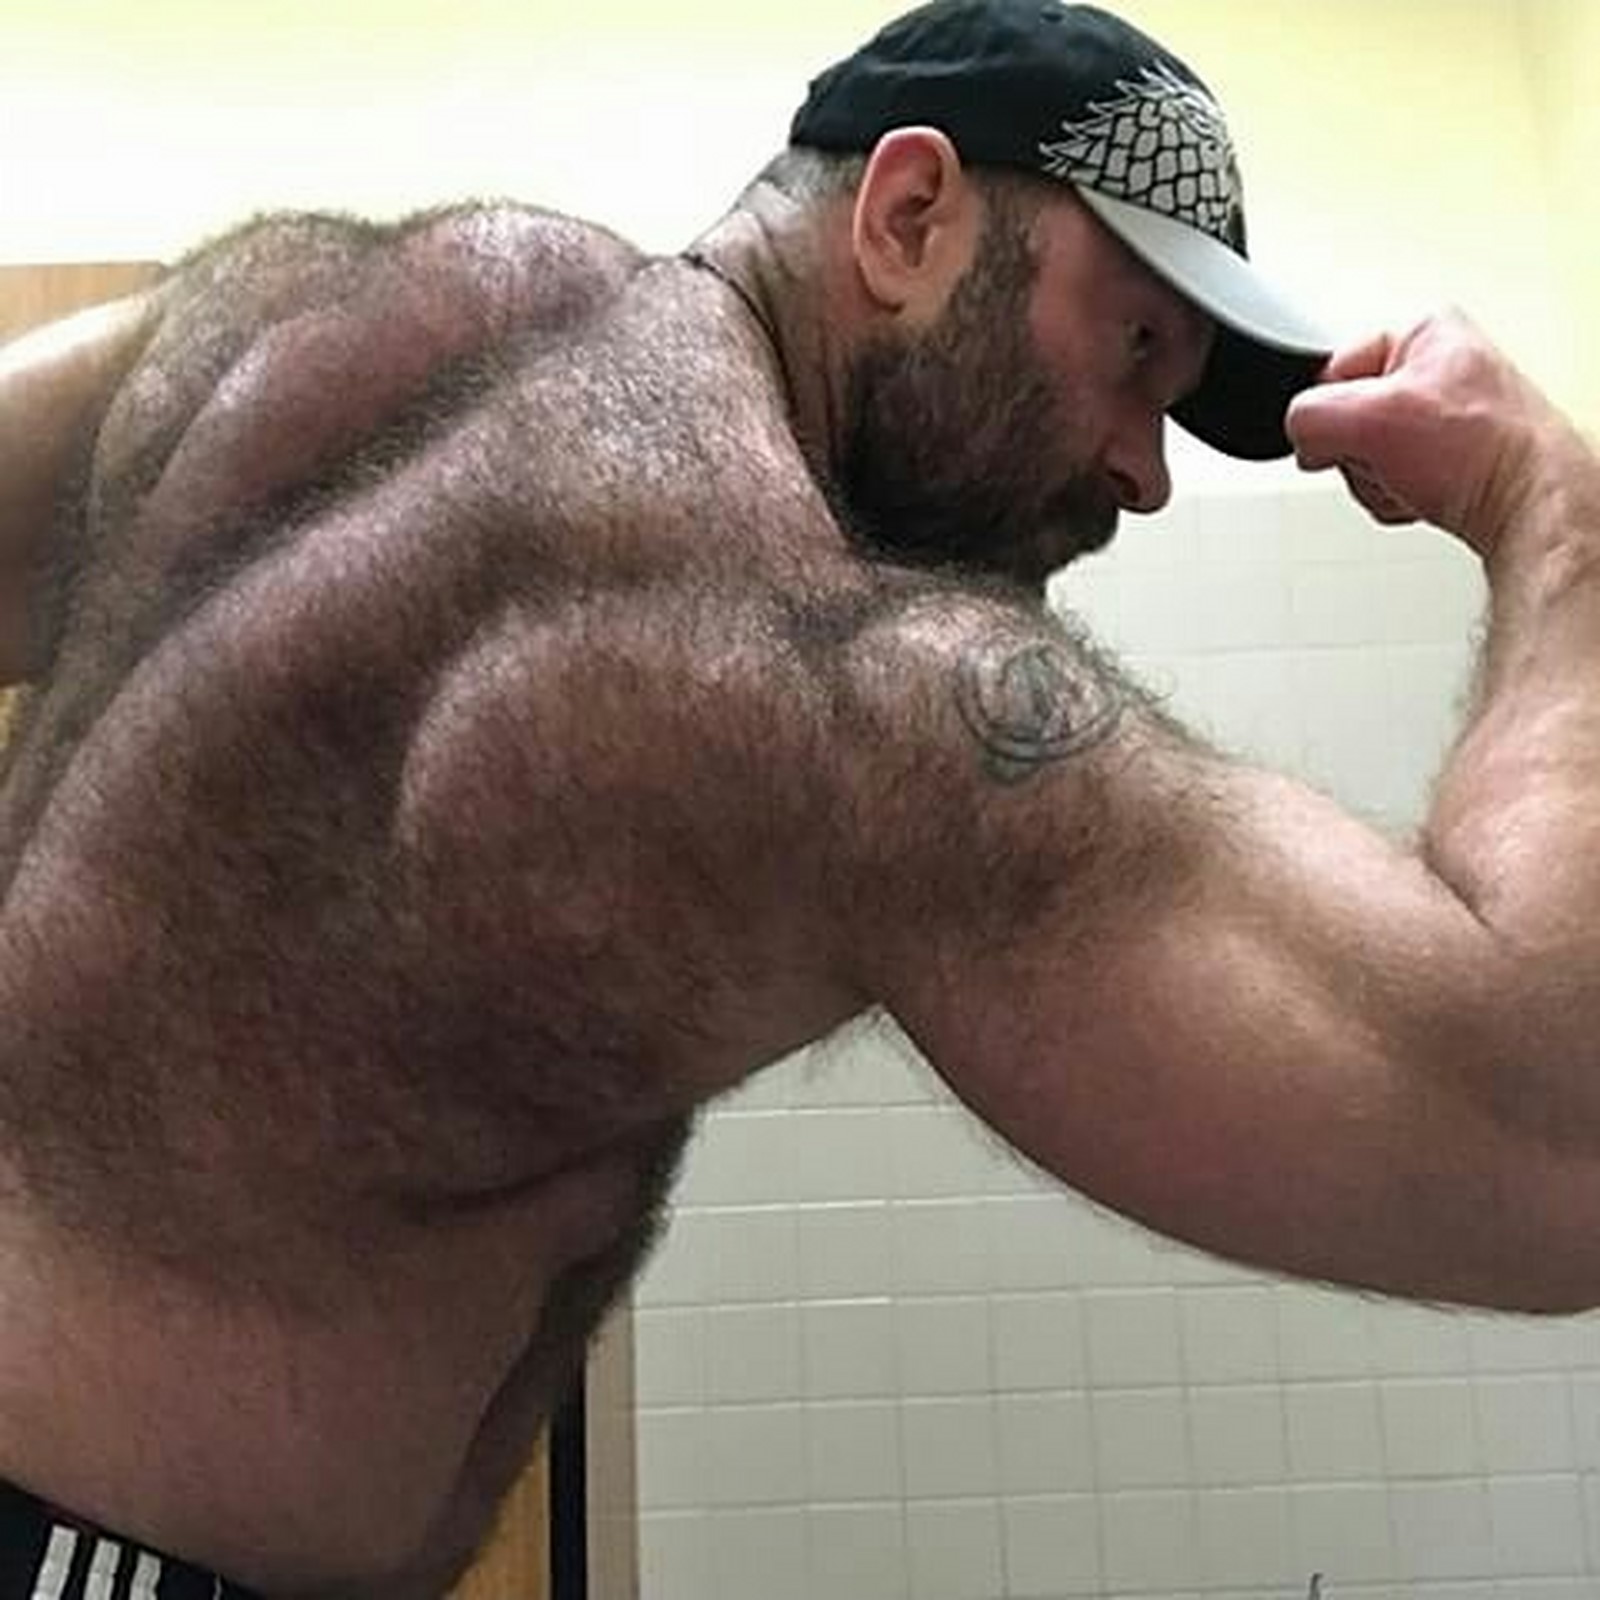 Black hairy muscle dread head jacking pictures